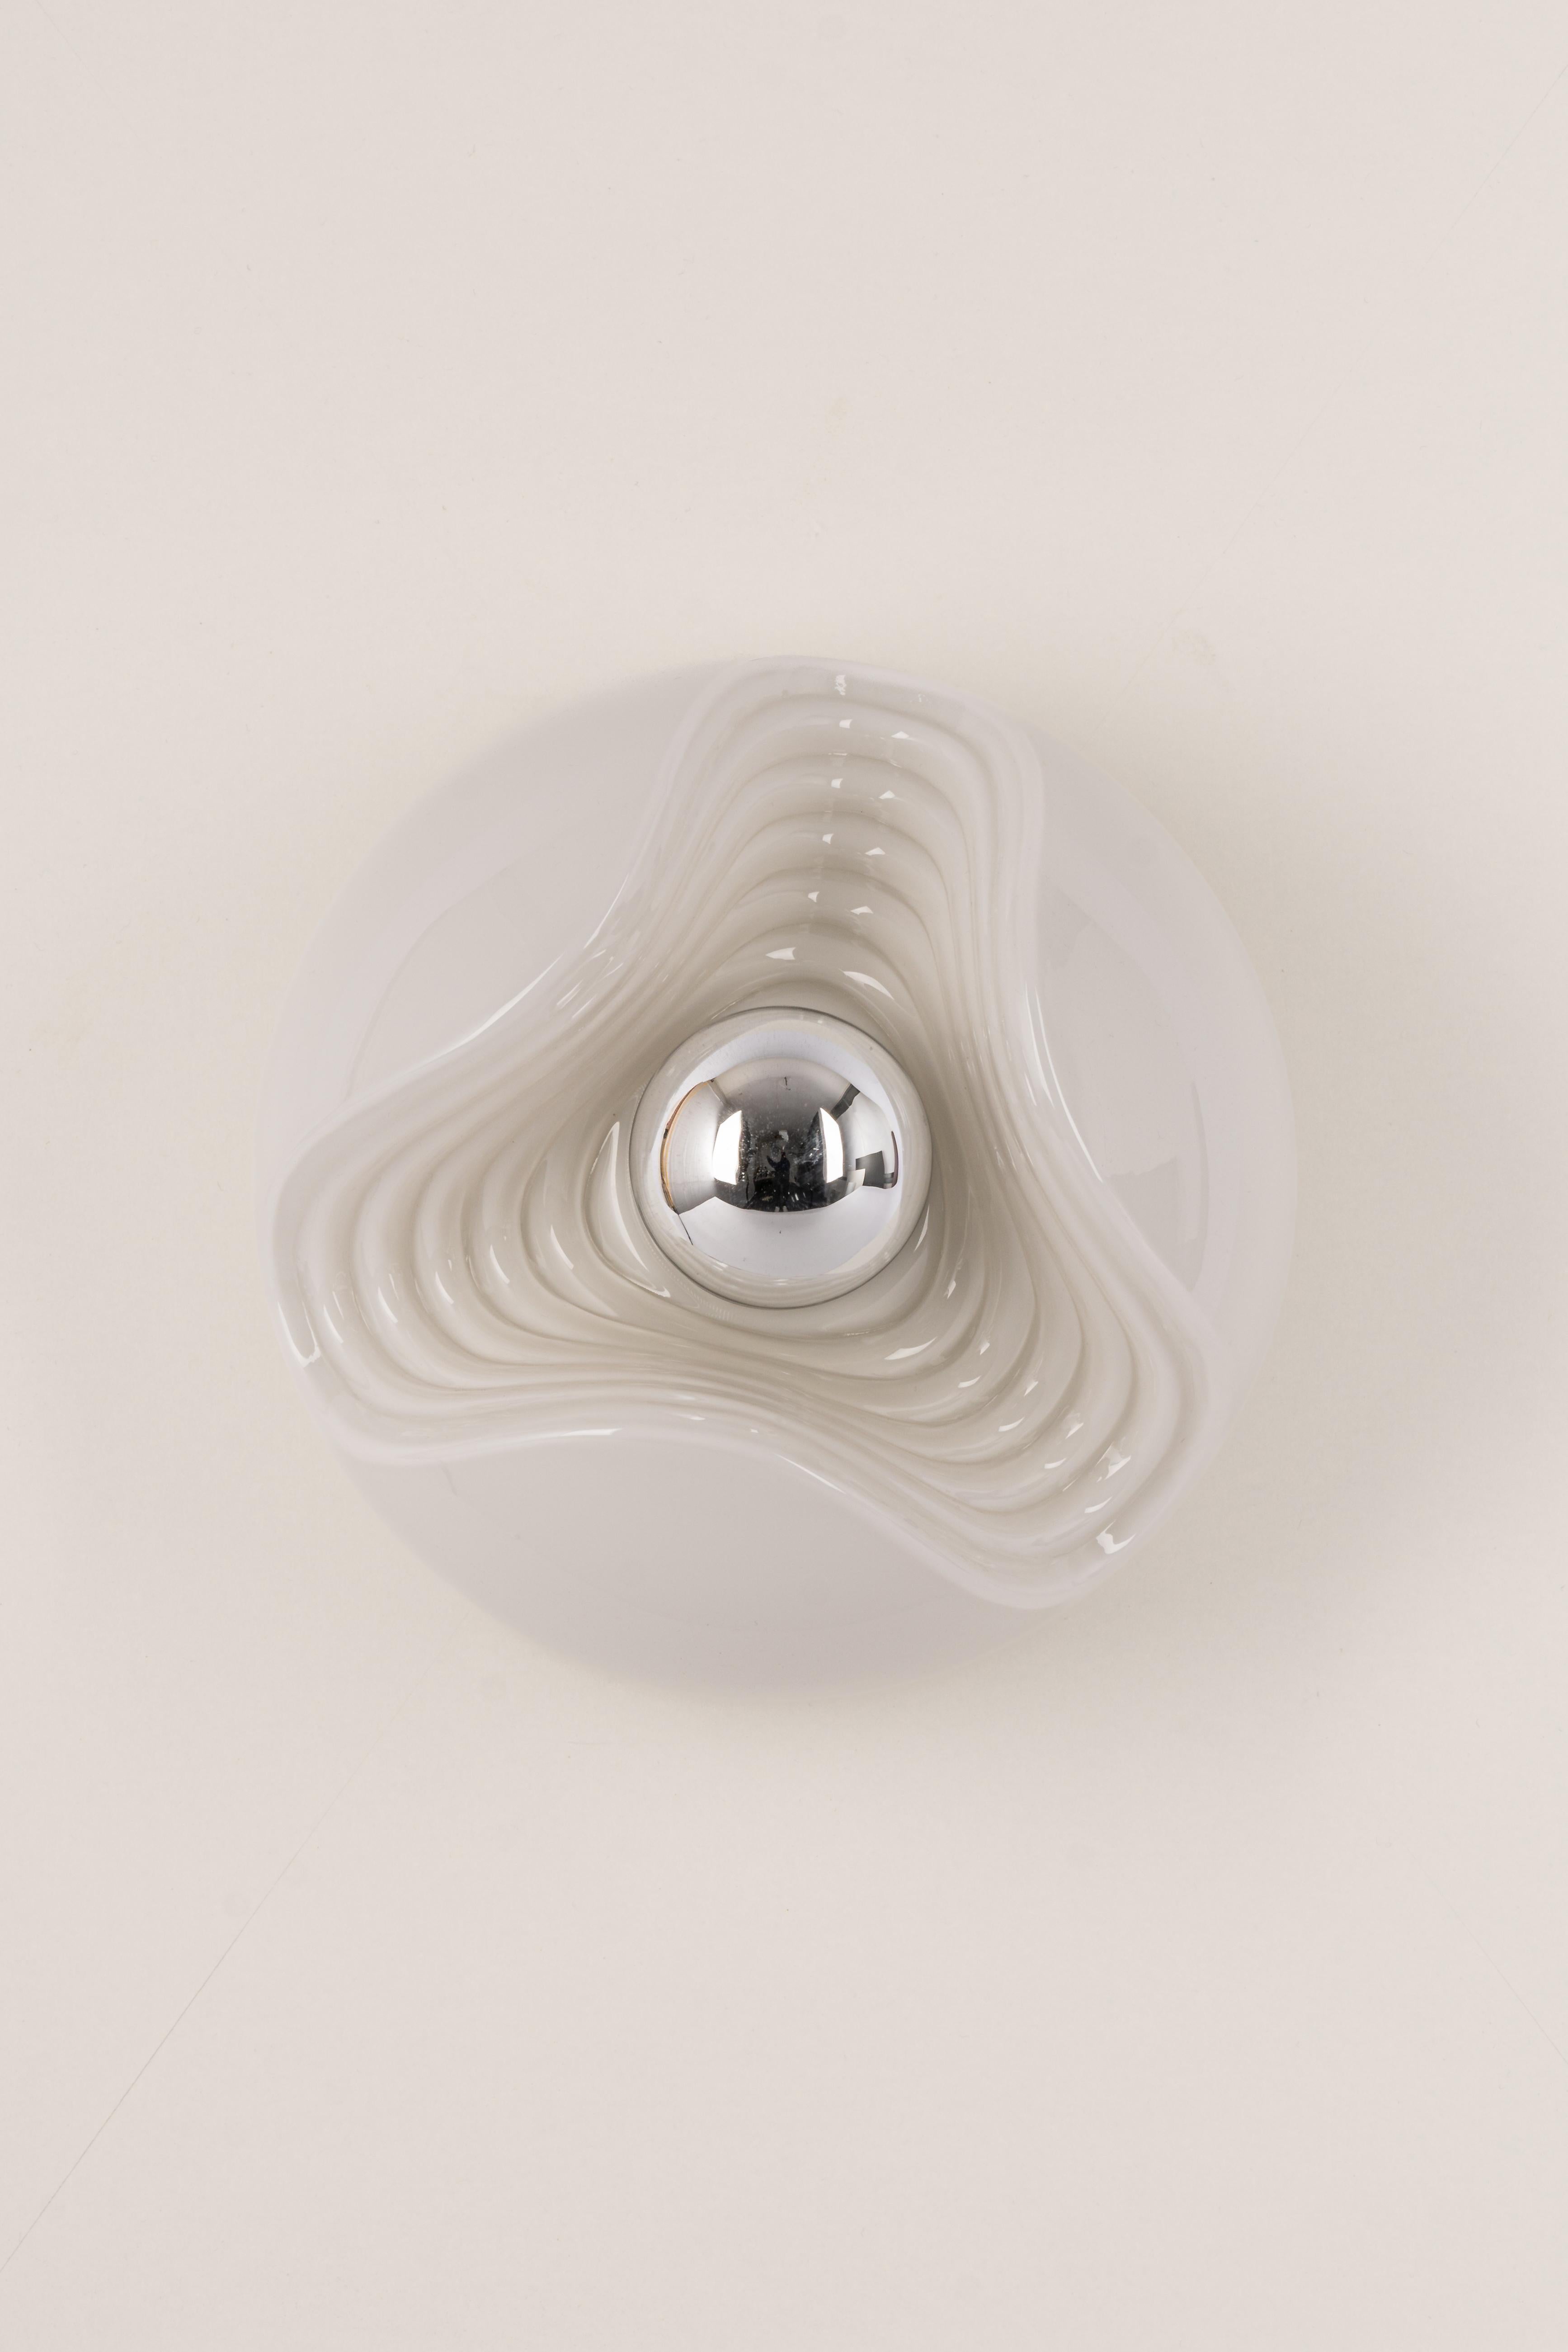 A special round biomorphic opal glass wall sconce / or flush mount designed by Koch & Lowy for Peill & Putzler, manufactured in Germany, circa 1970s.

Sockets: One x E27 standard bulb. (100 W max).-
Light bulbs are not included. It is possible to